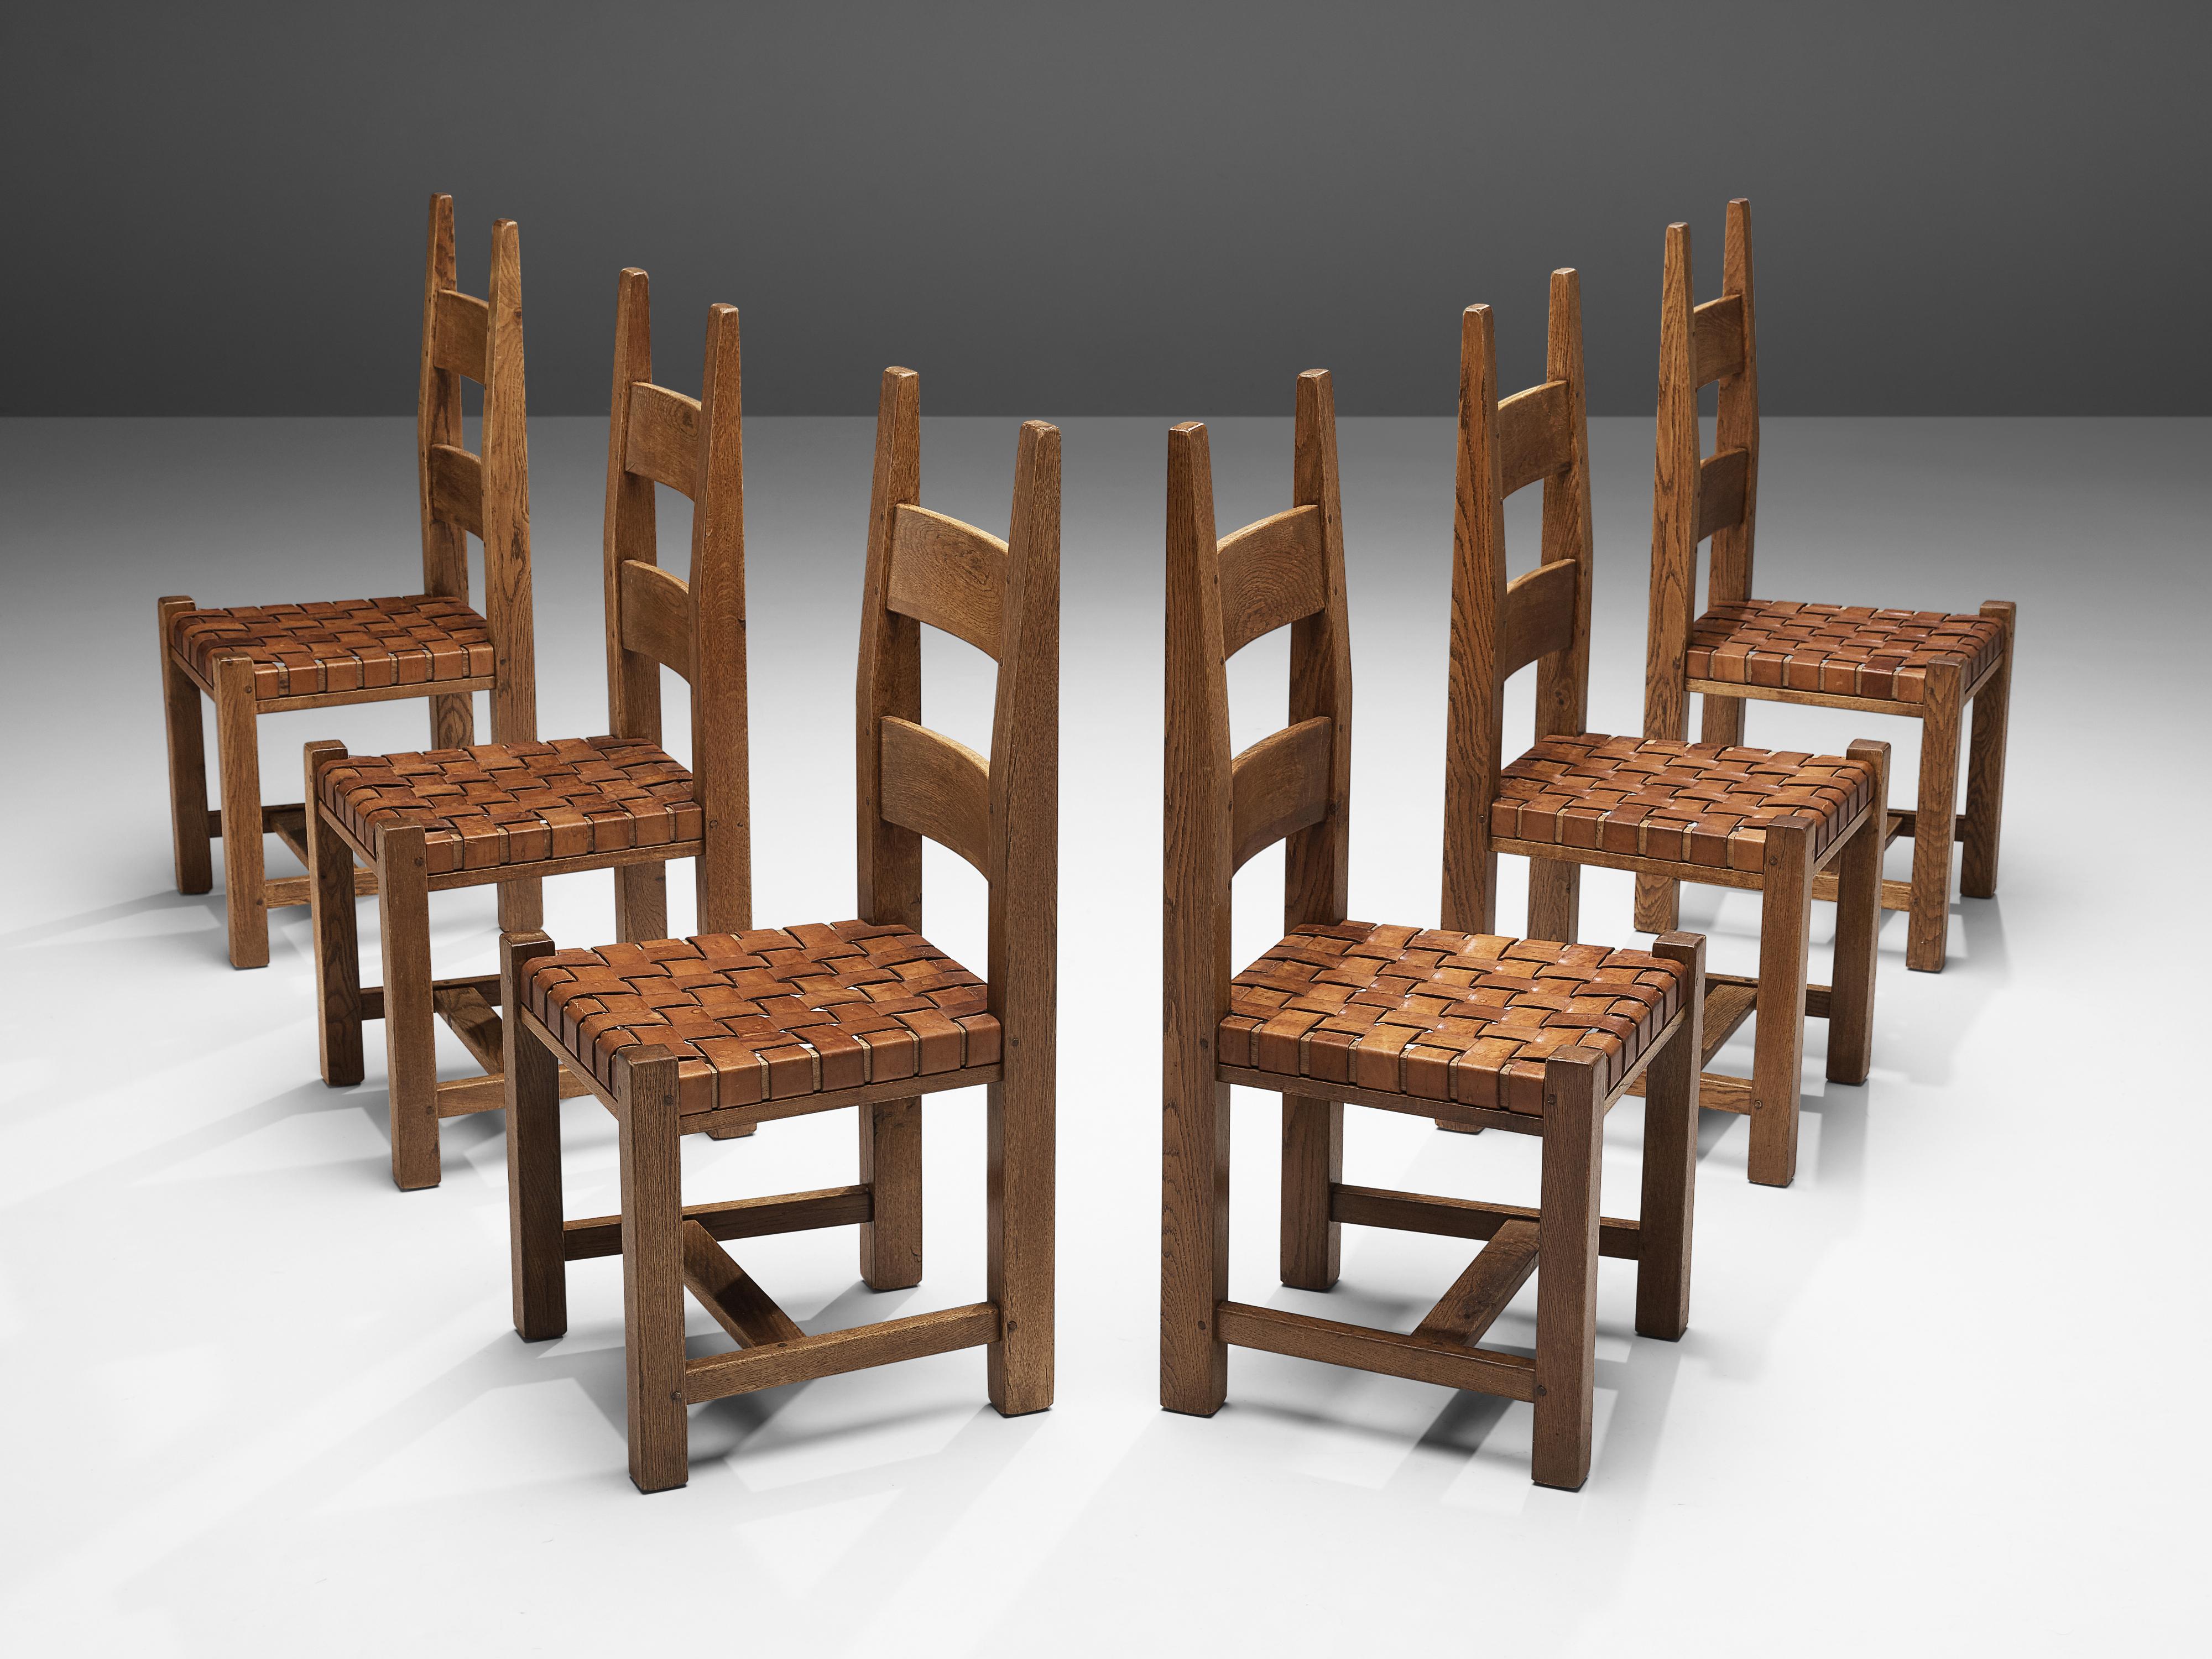 Set of six dining chairs, oak, leather, France, 1960s

With their high, pointed backrests this set of six dining chairs gets a Brutalist look. Both legs at the back are continuing into the backrest and ending on top with tapered ends. The backrest